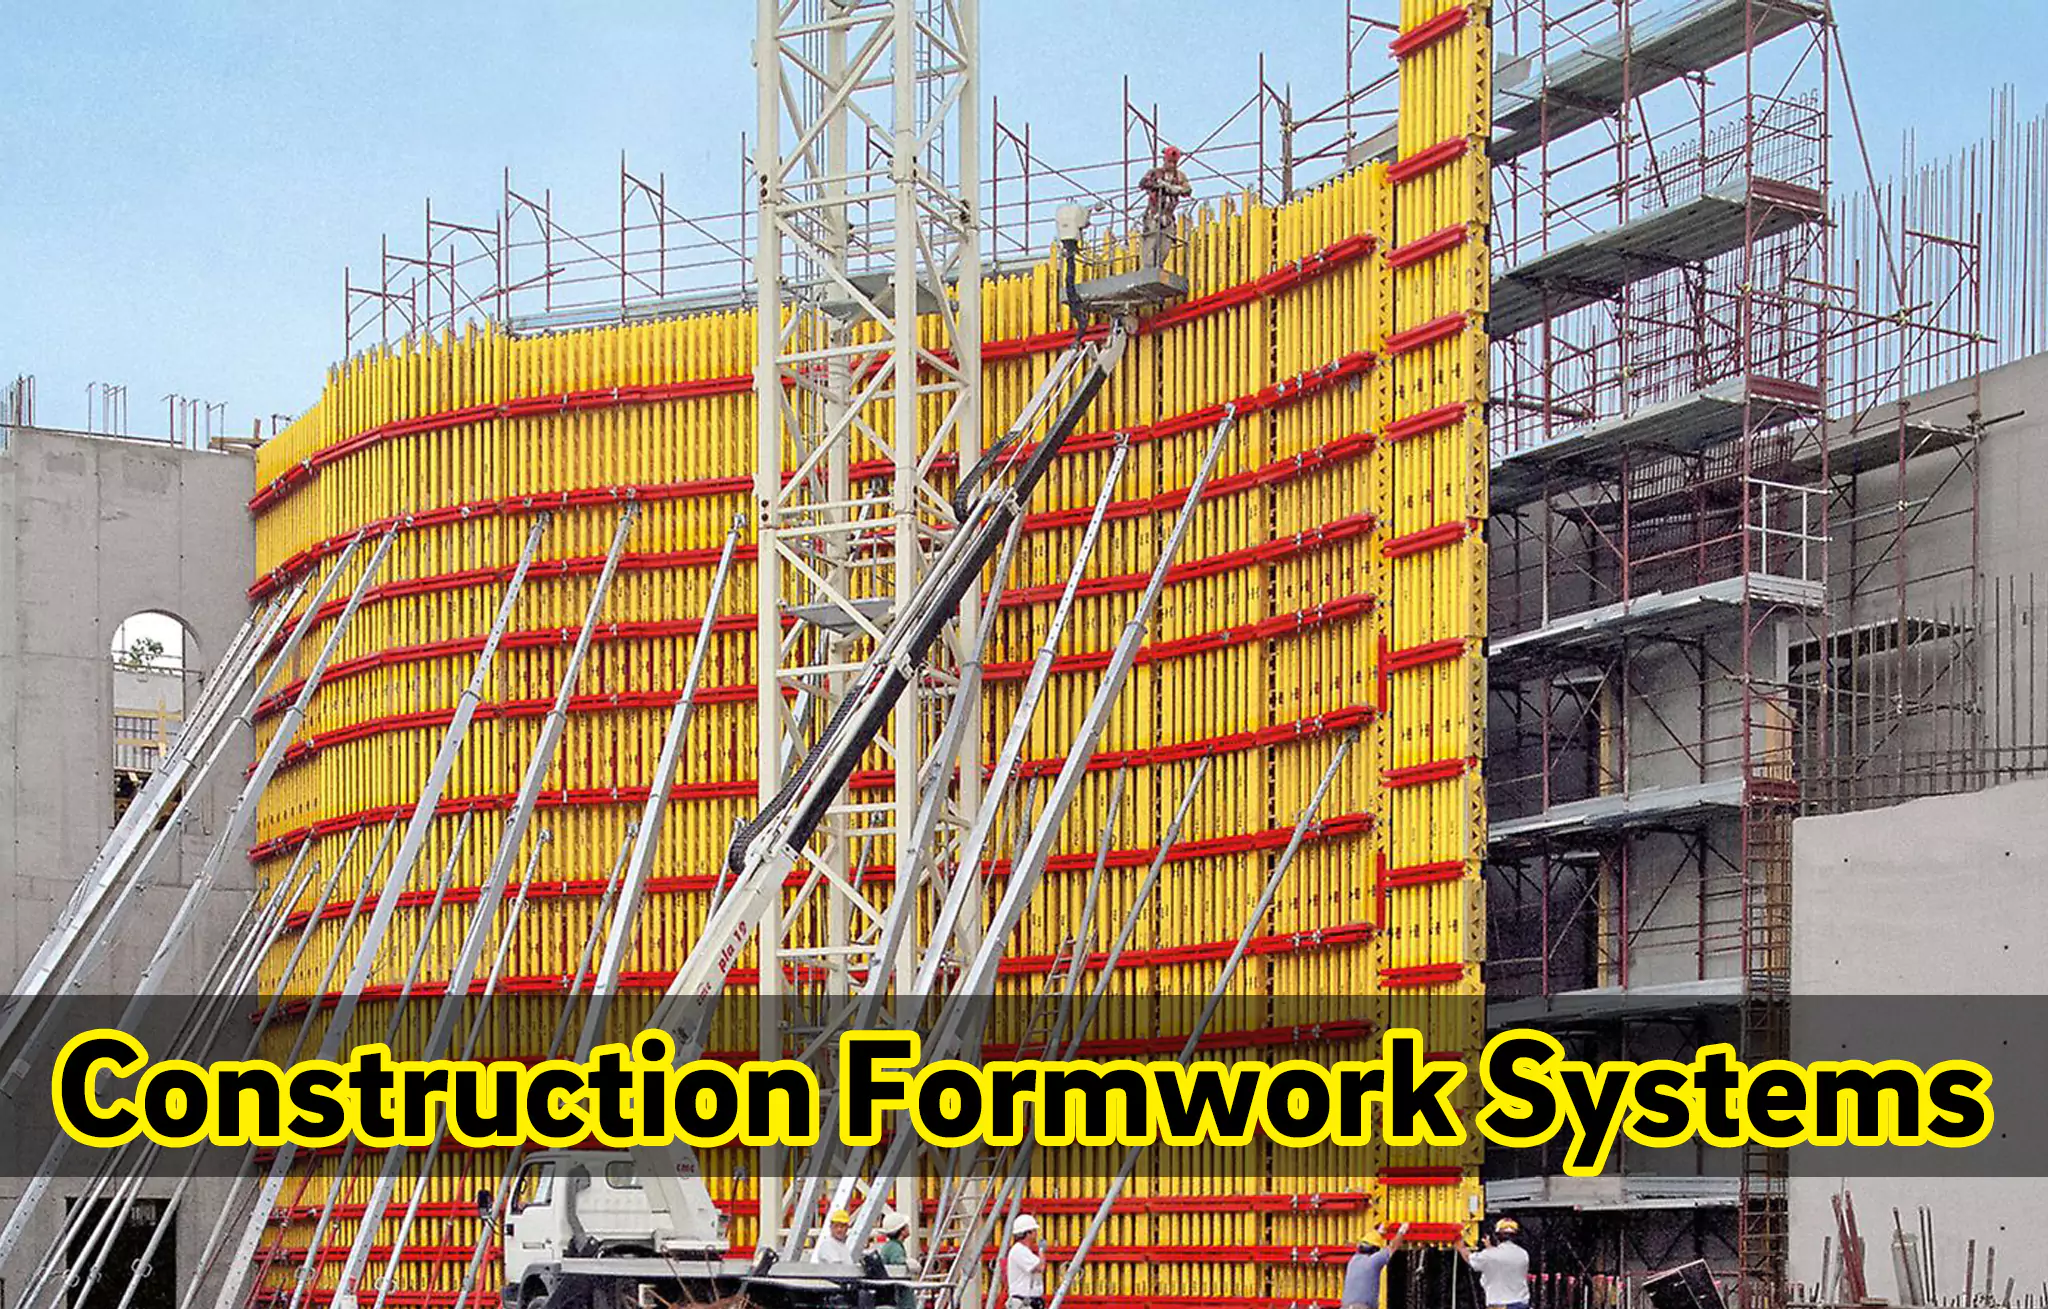 Construction Formwork Systems